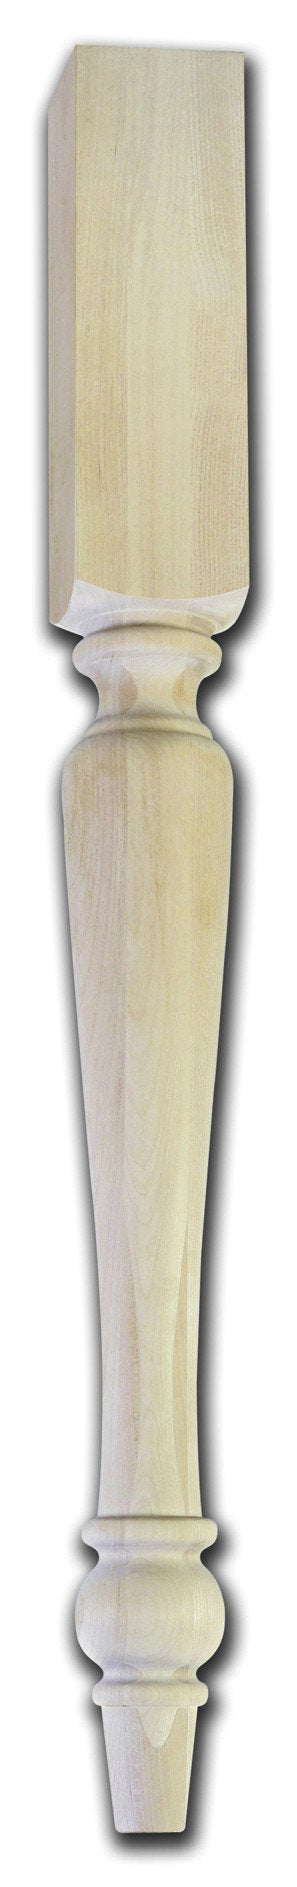 Castlewood SY-L-5040 French Table Leg